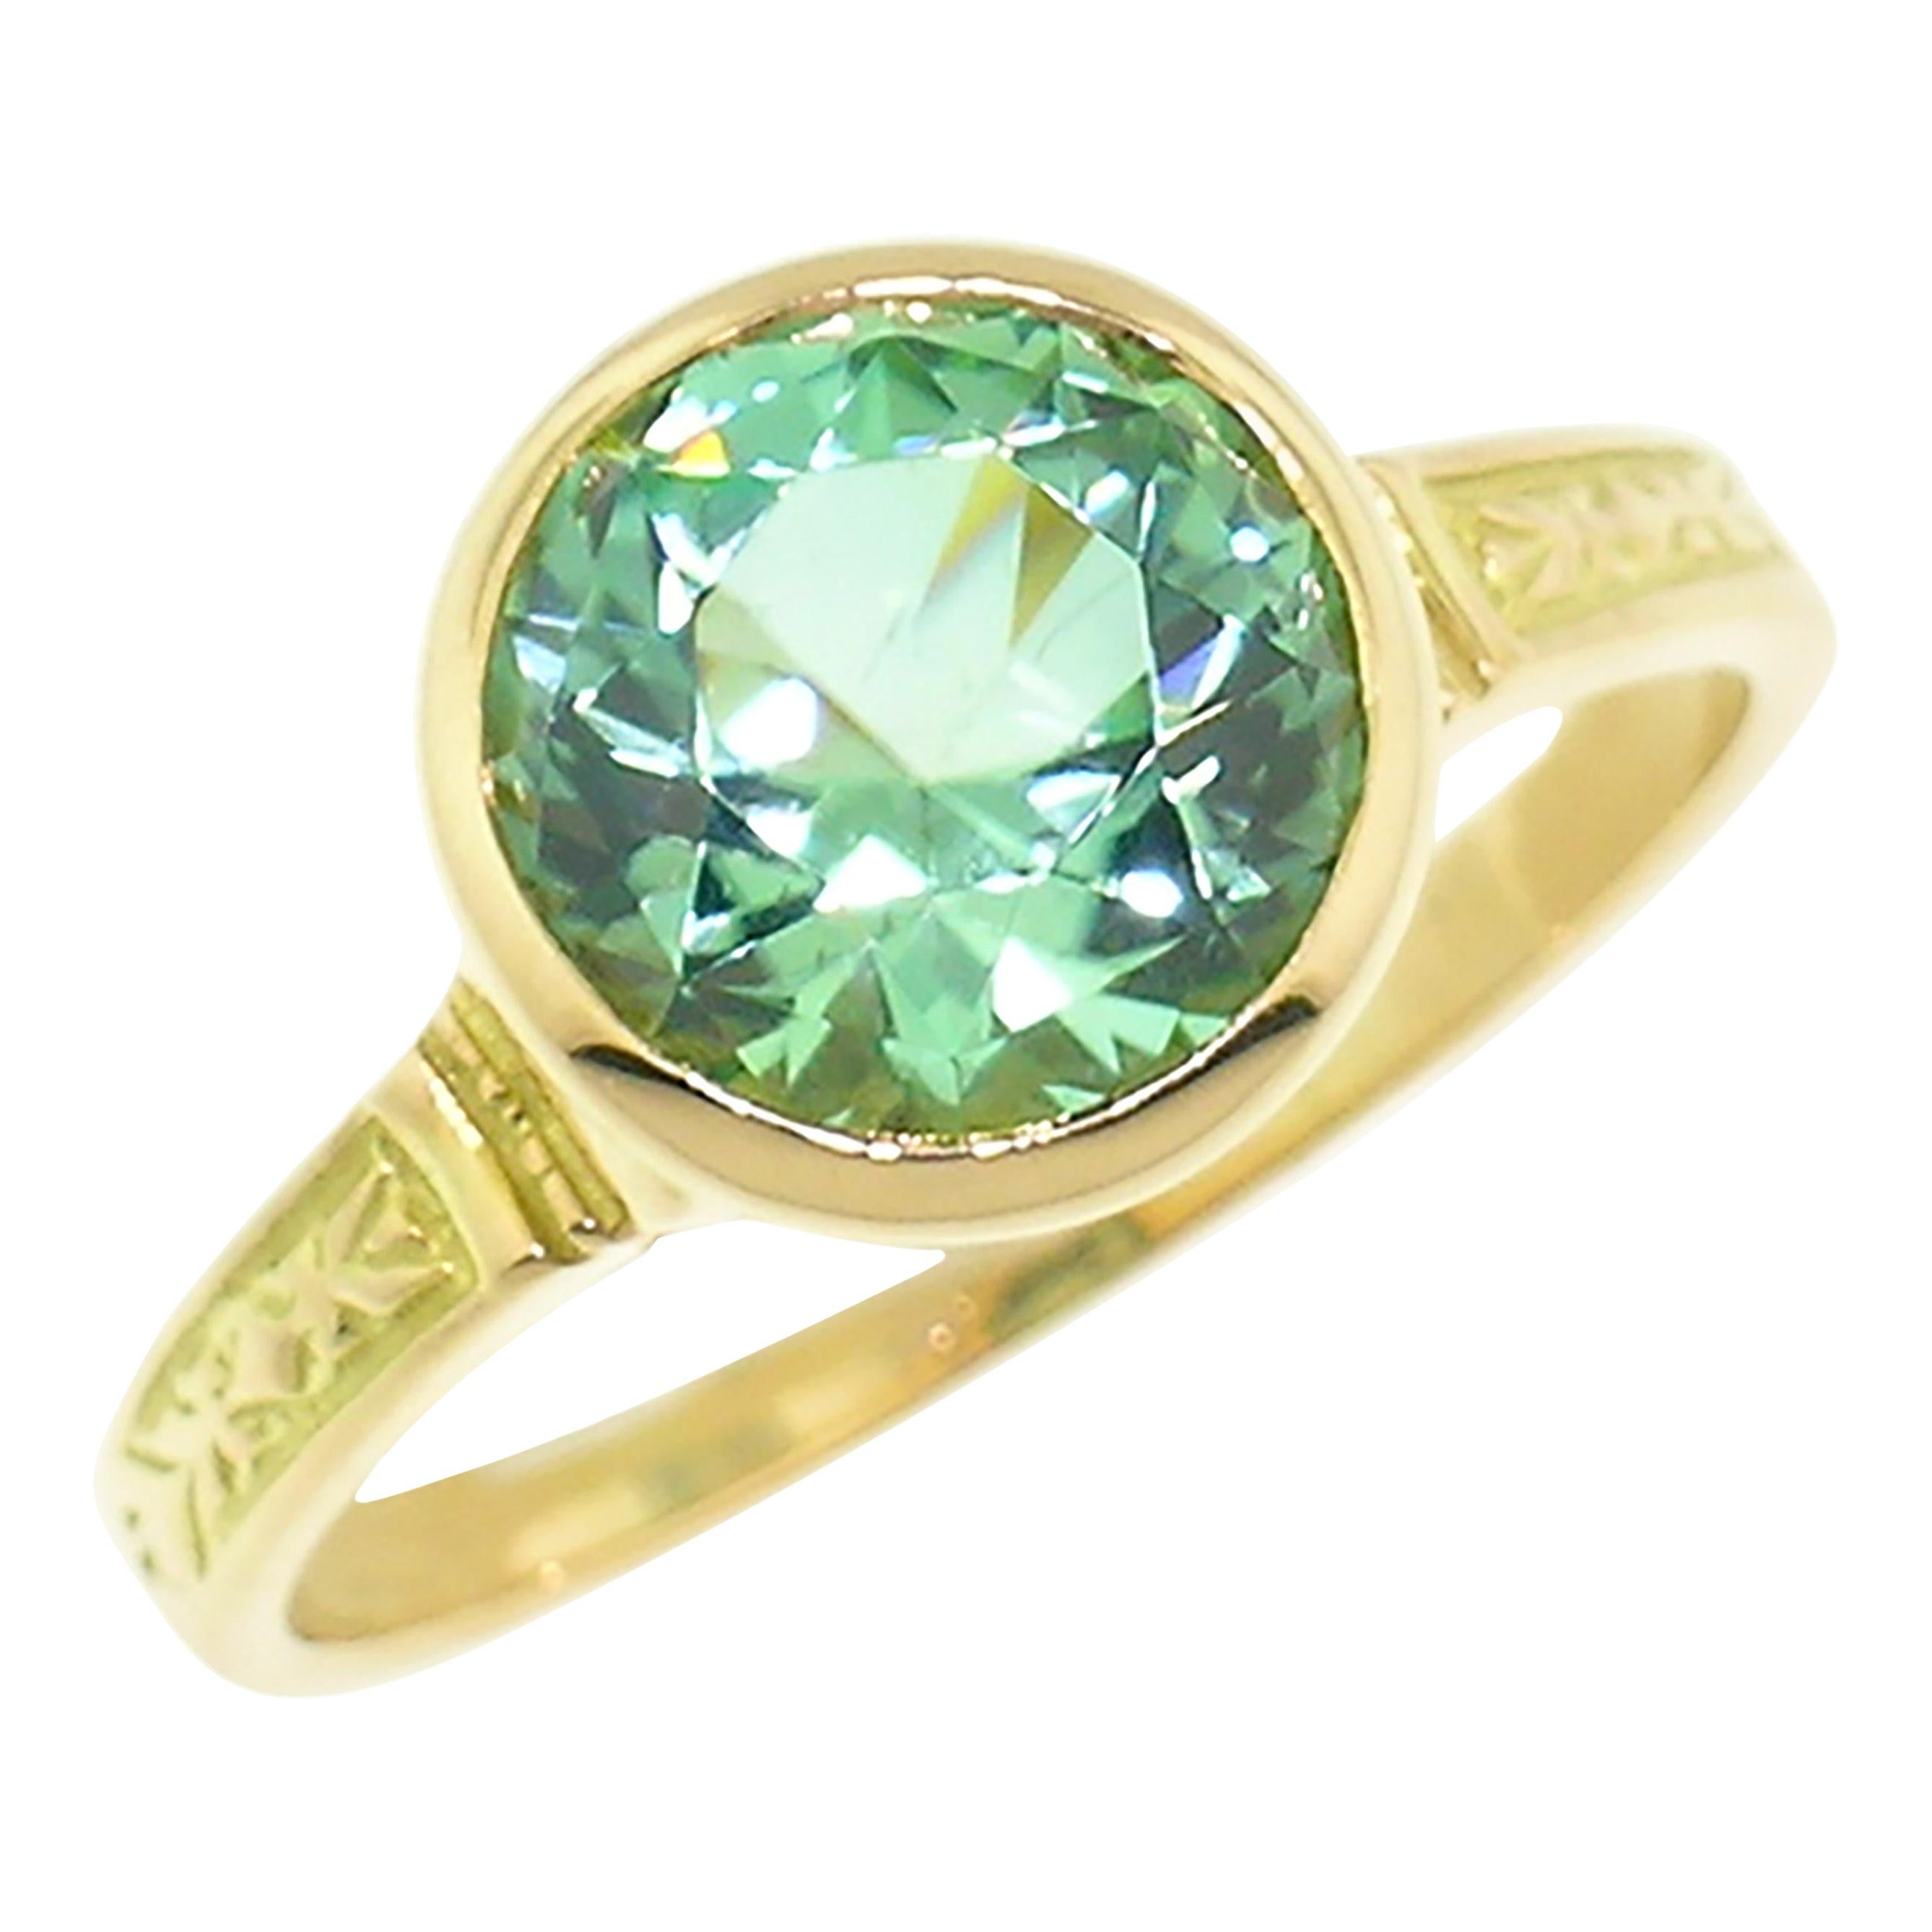 2.40ct Mint Green Tourmaline in 18kt Cassandra Ring by Cynthia Scott Jewelry For Sale